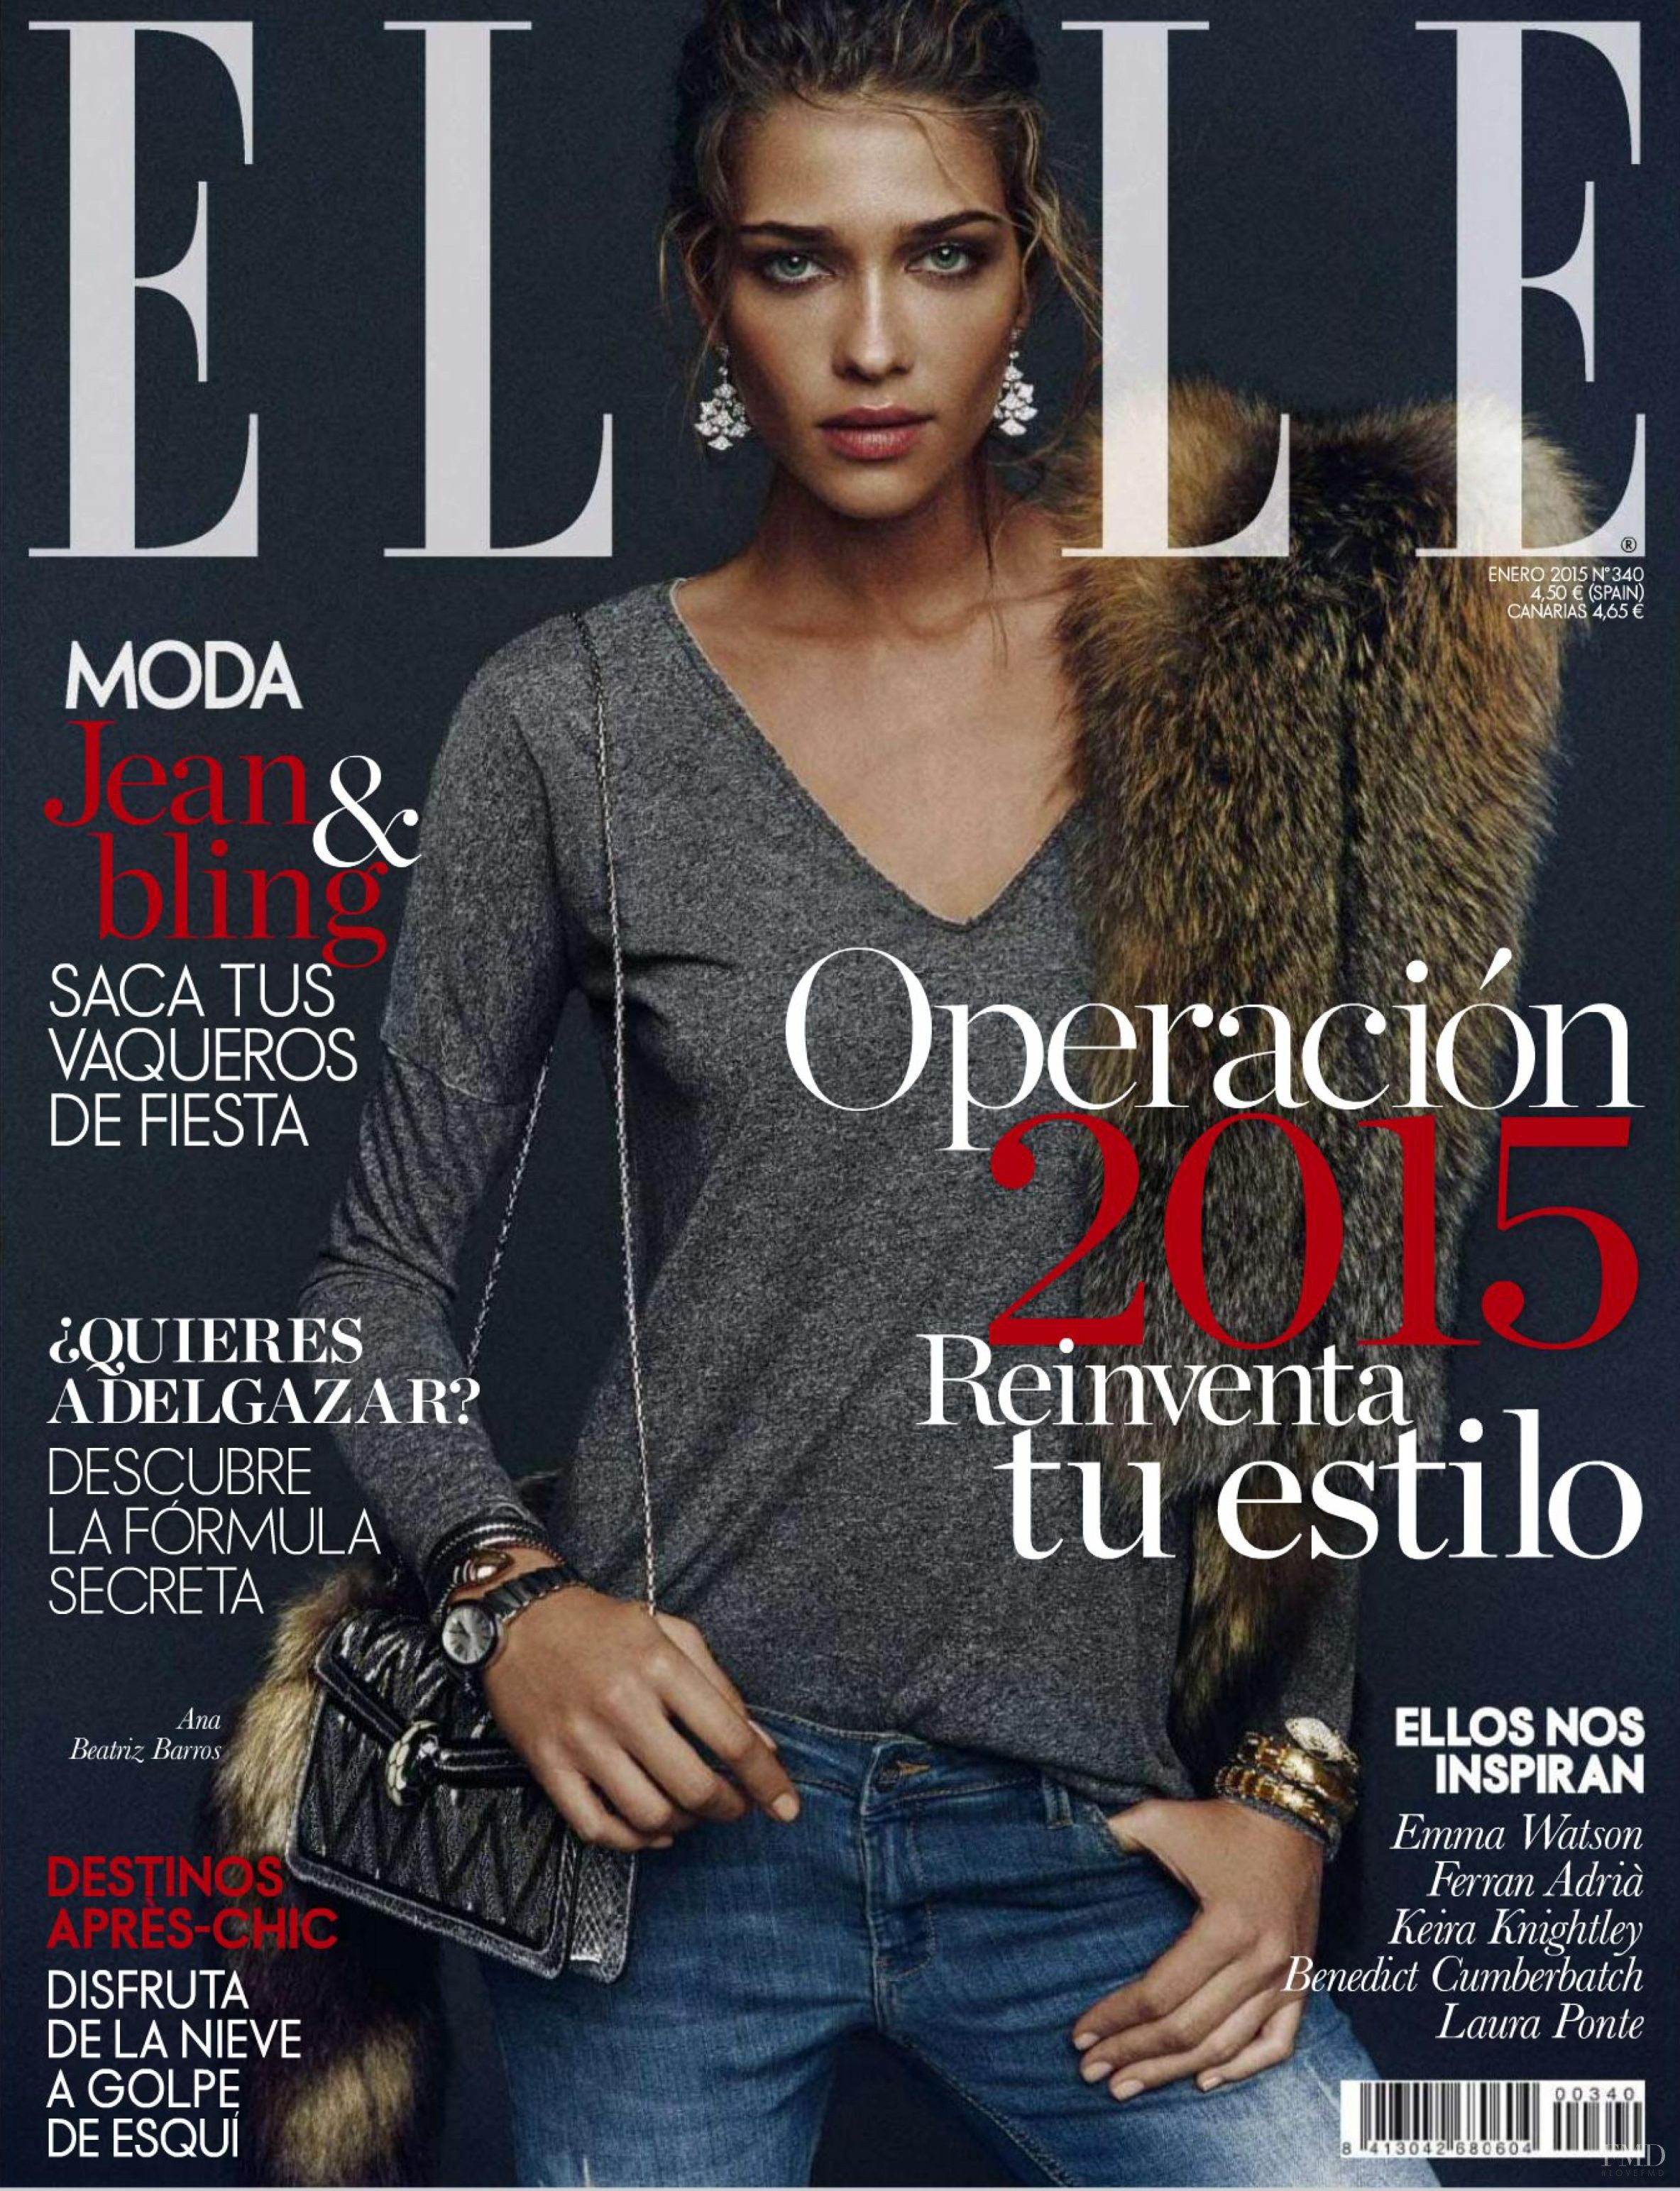 Cover of Elle Spain with Ana Beatriz Barros, January 2015 (ID:35850 ...